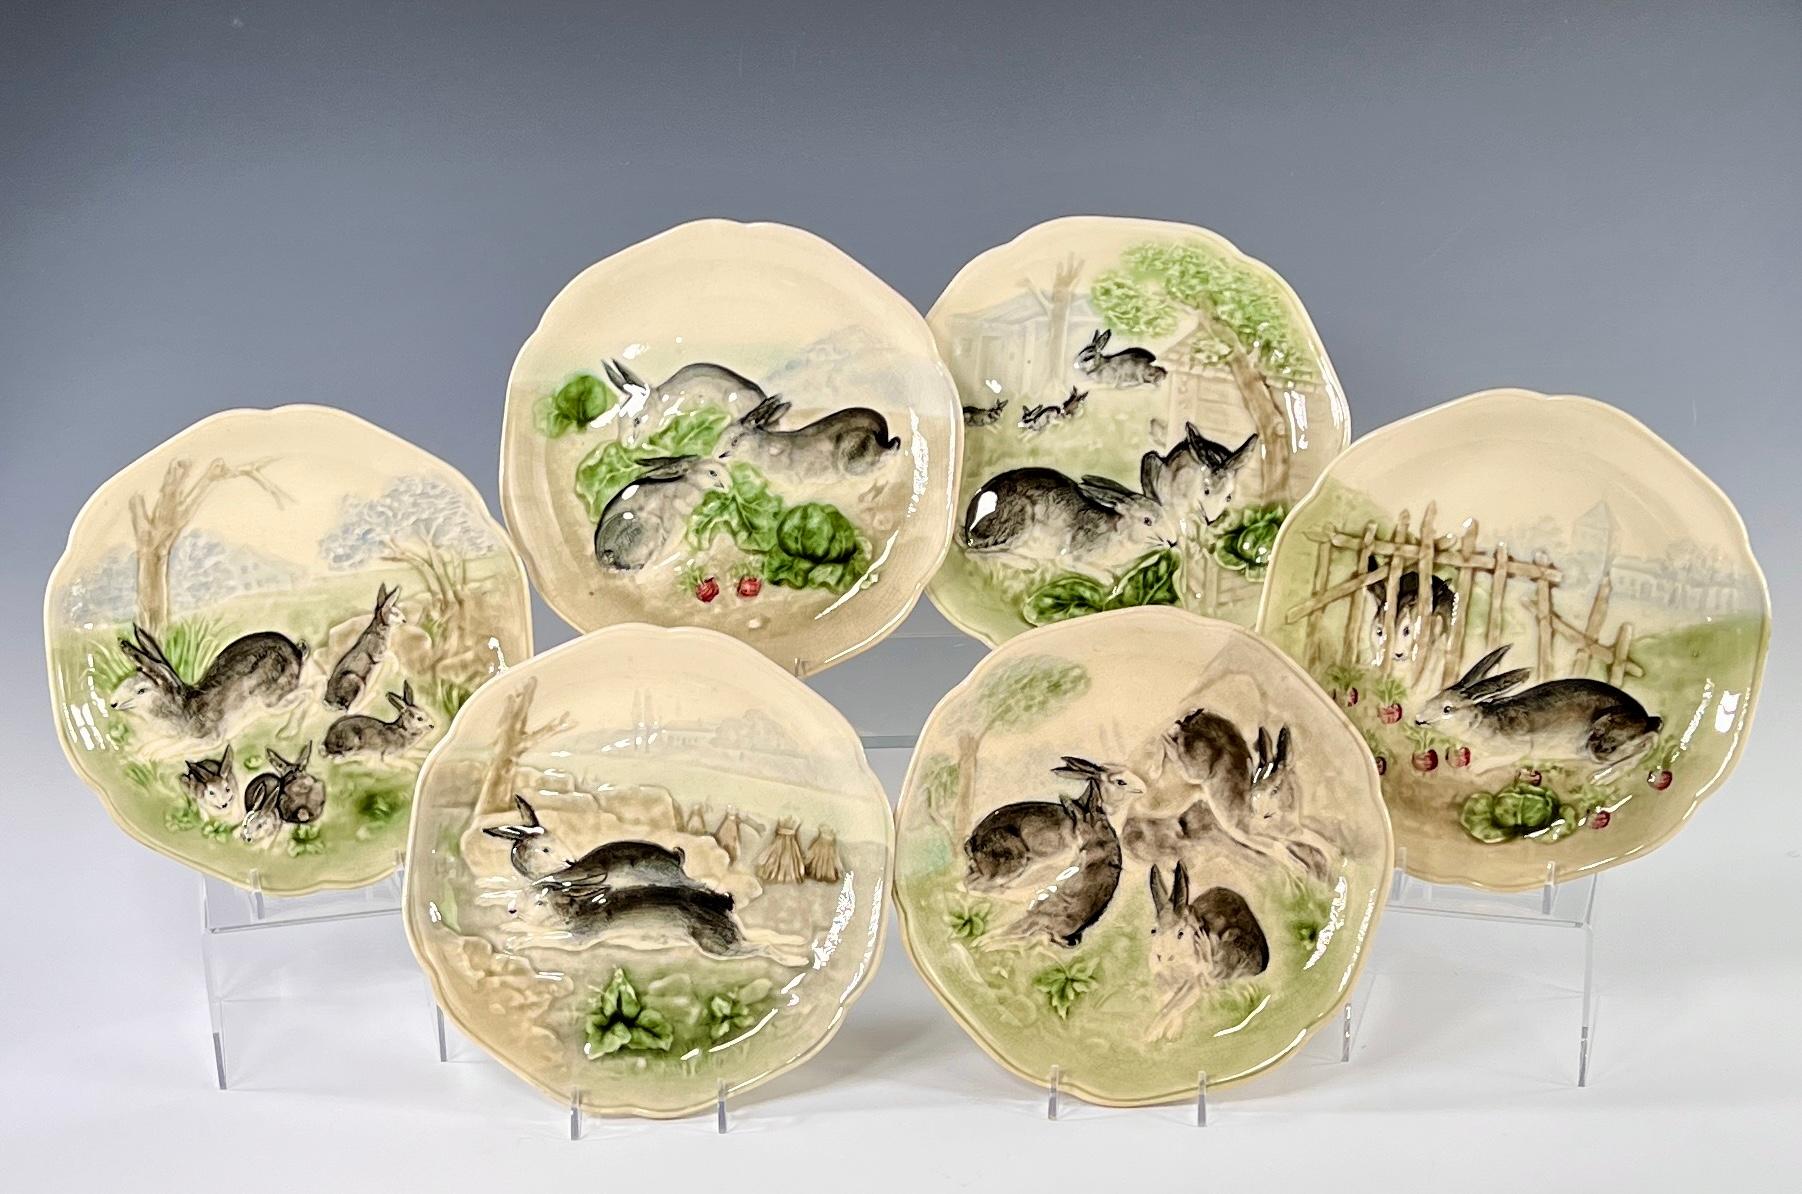 This set of 6 bunny plates are signed Choisy Le Roi, the famed Aesthetic Movement Majolica porcelain company in France. These were commonly sold by the New York retail firm of Higgins and Seiter but this set precedes that retailer's connection. Ca.